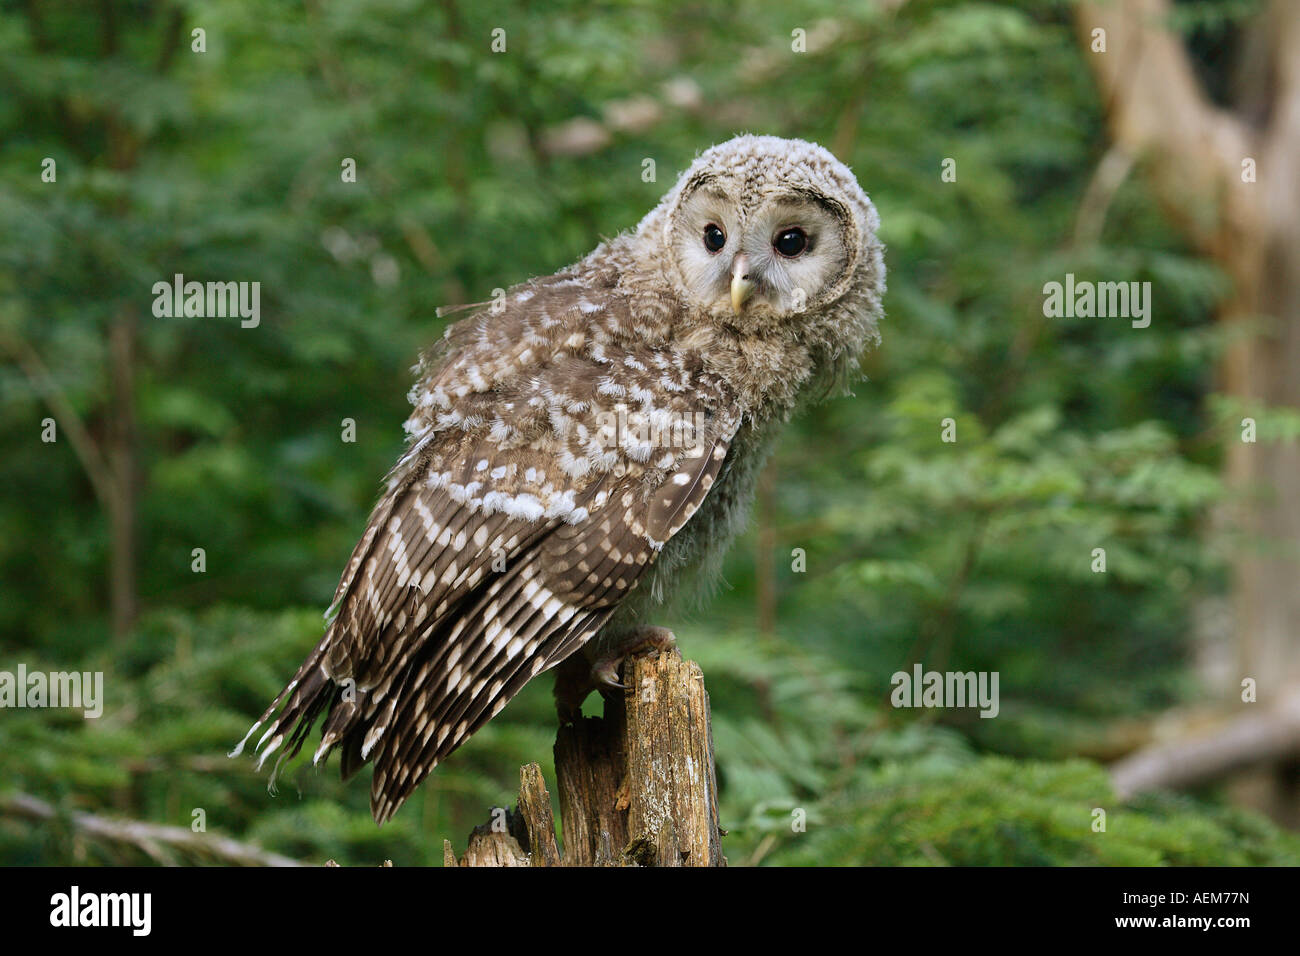 young ural owl on branch / Strix uralensis Stock Photo